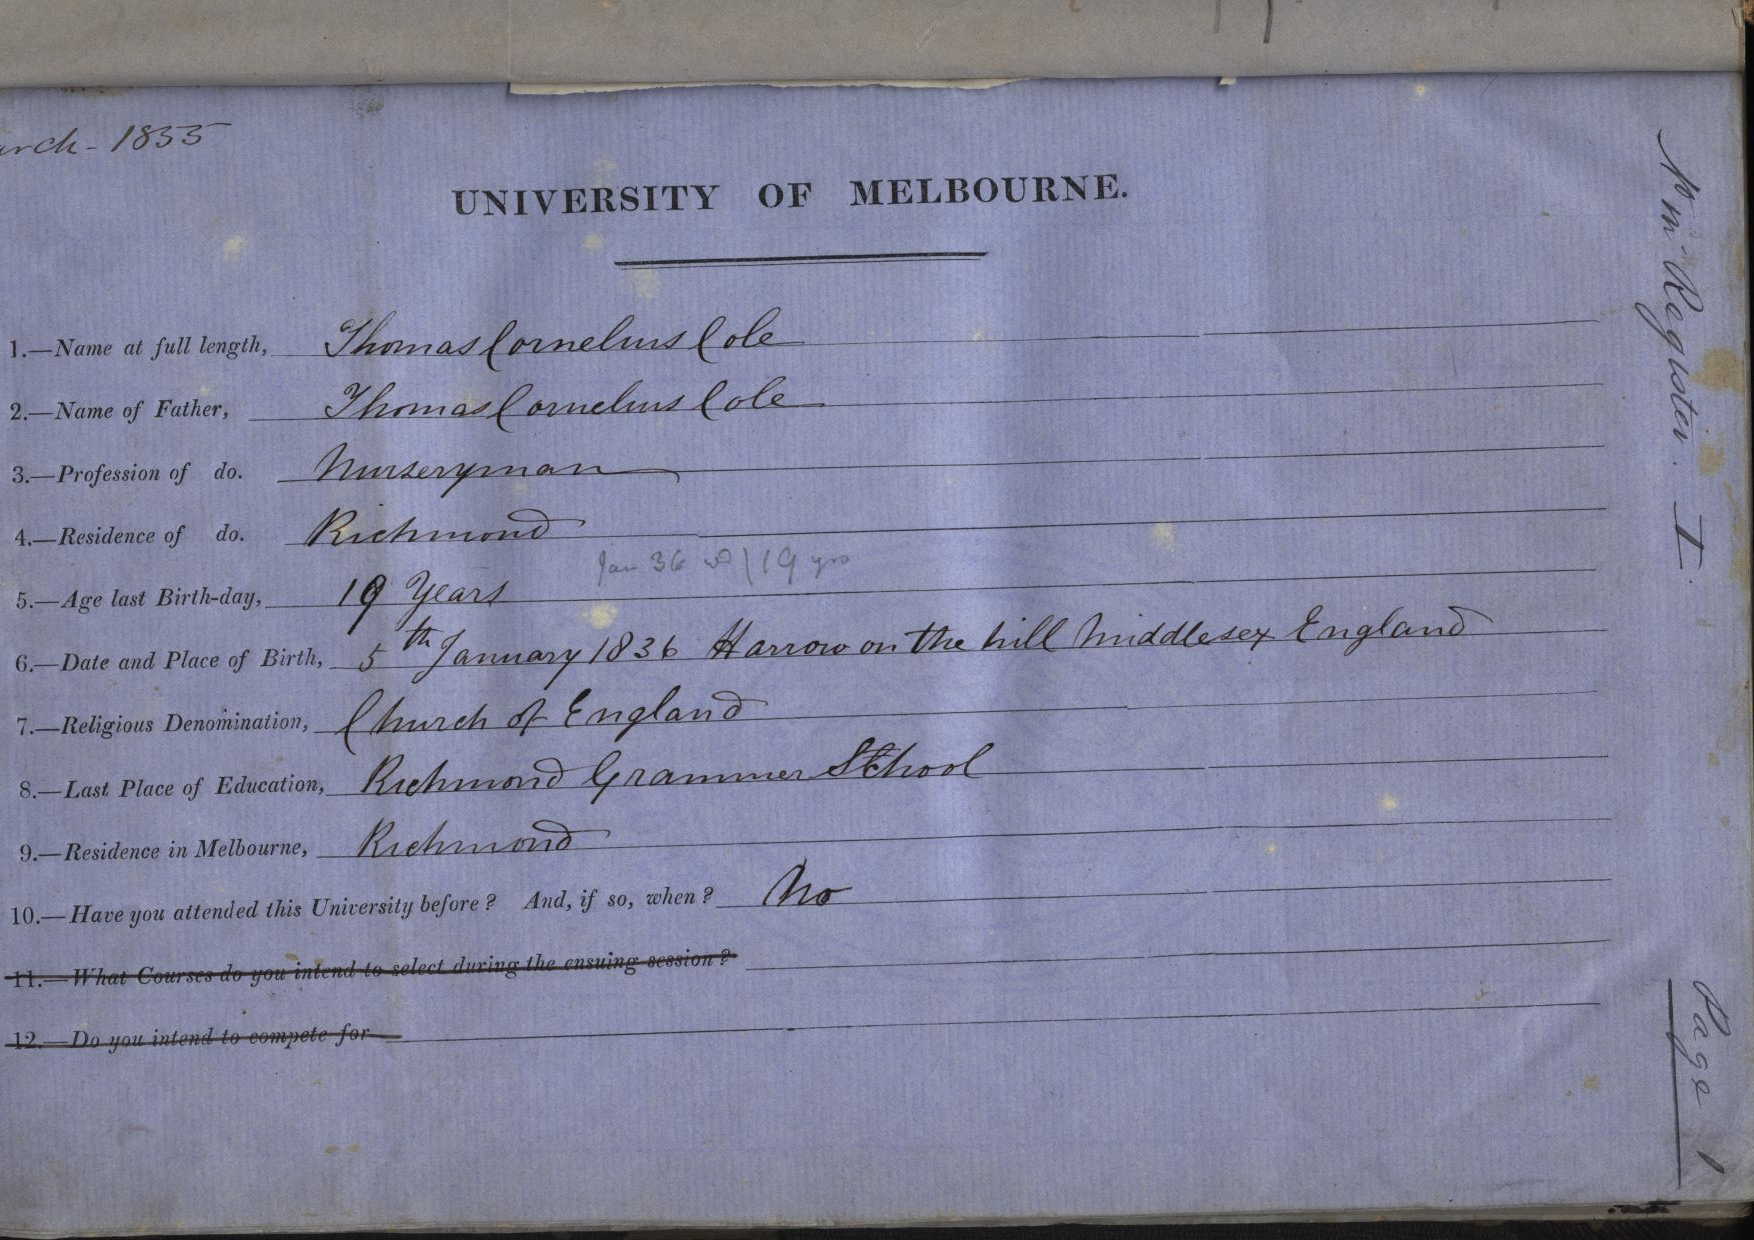 First Matriculation entry form